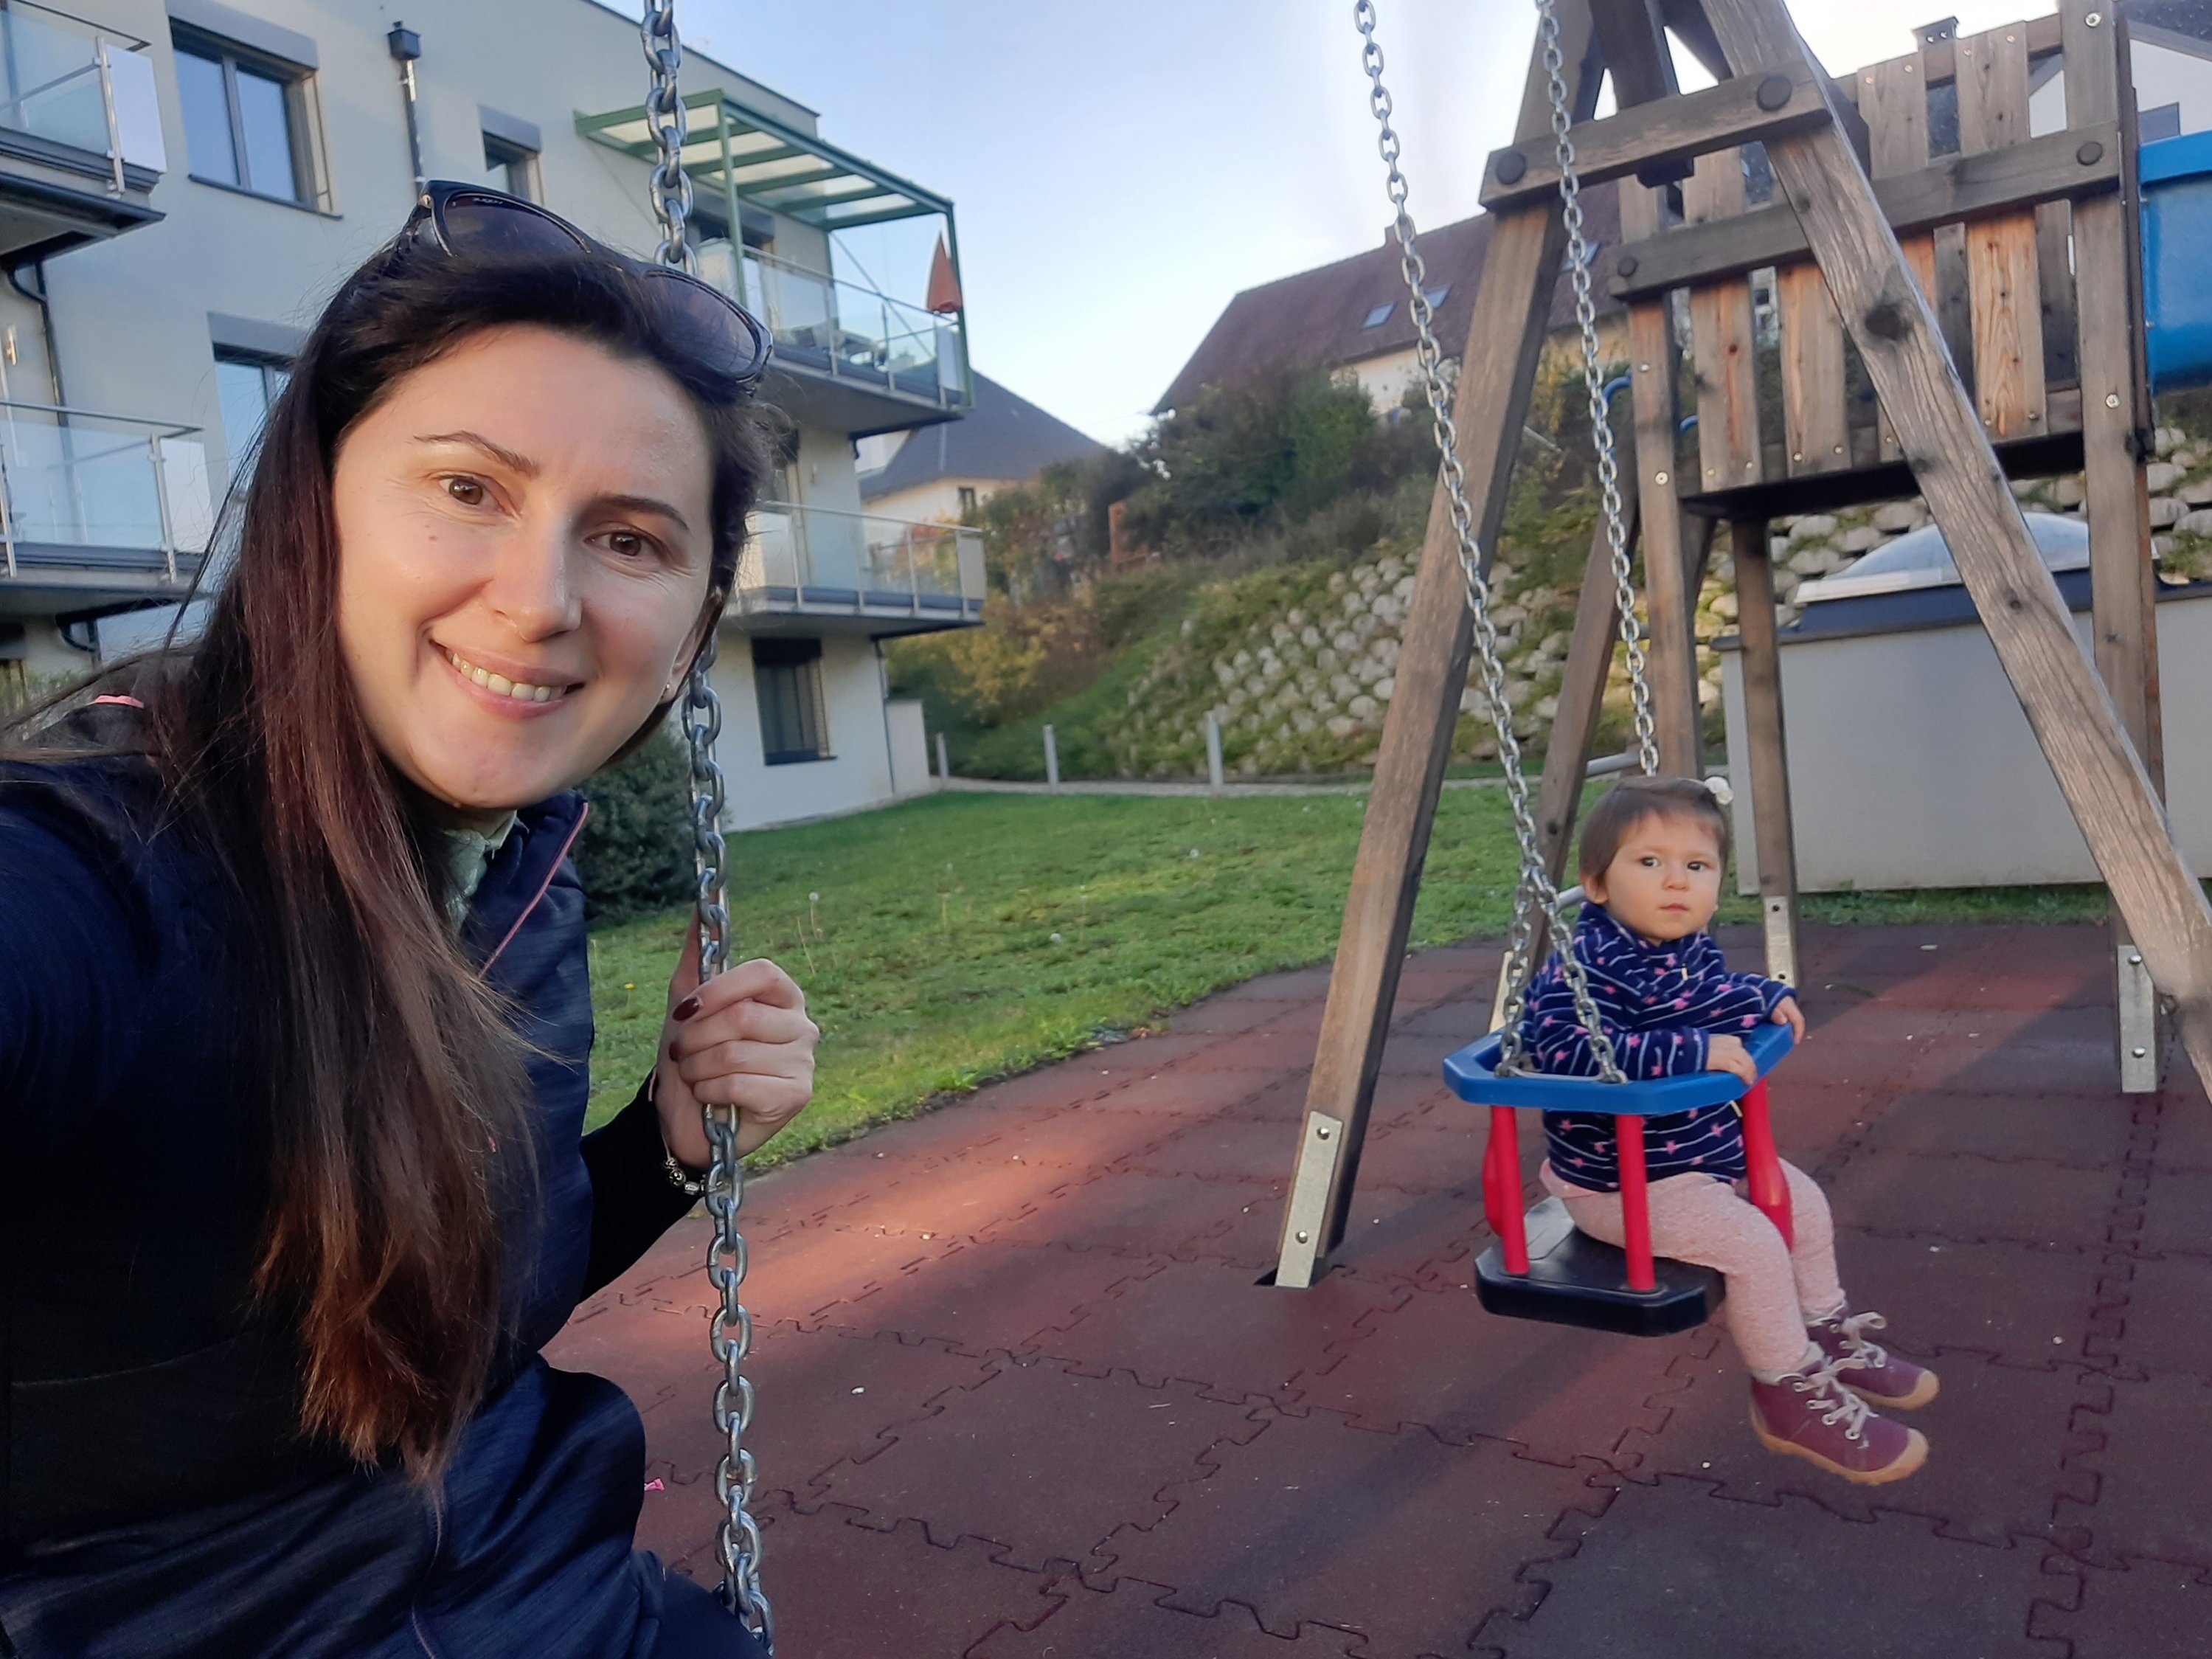 Fjolla and her daughter on a set of swings in front of their home